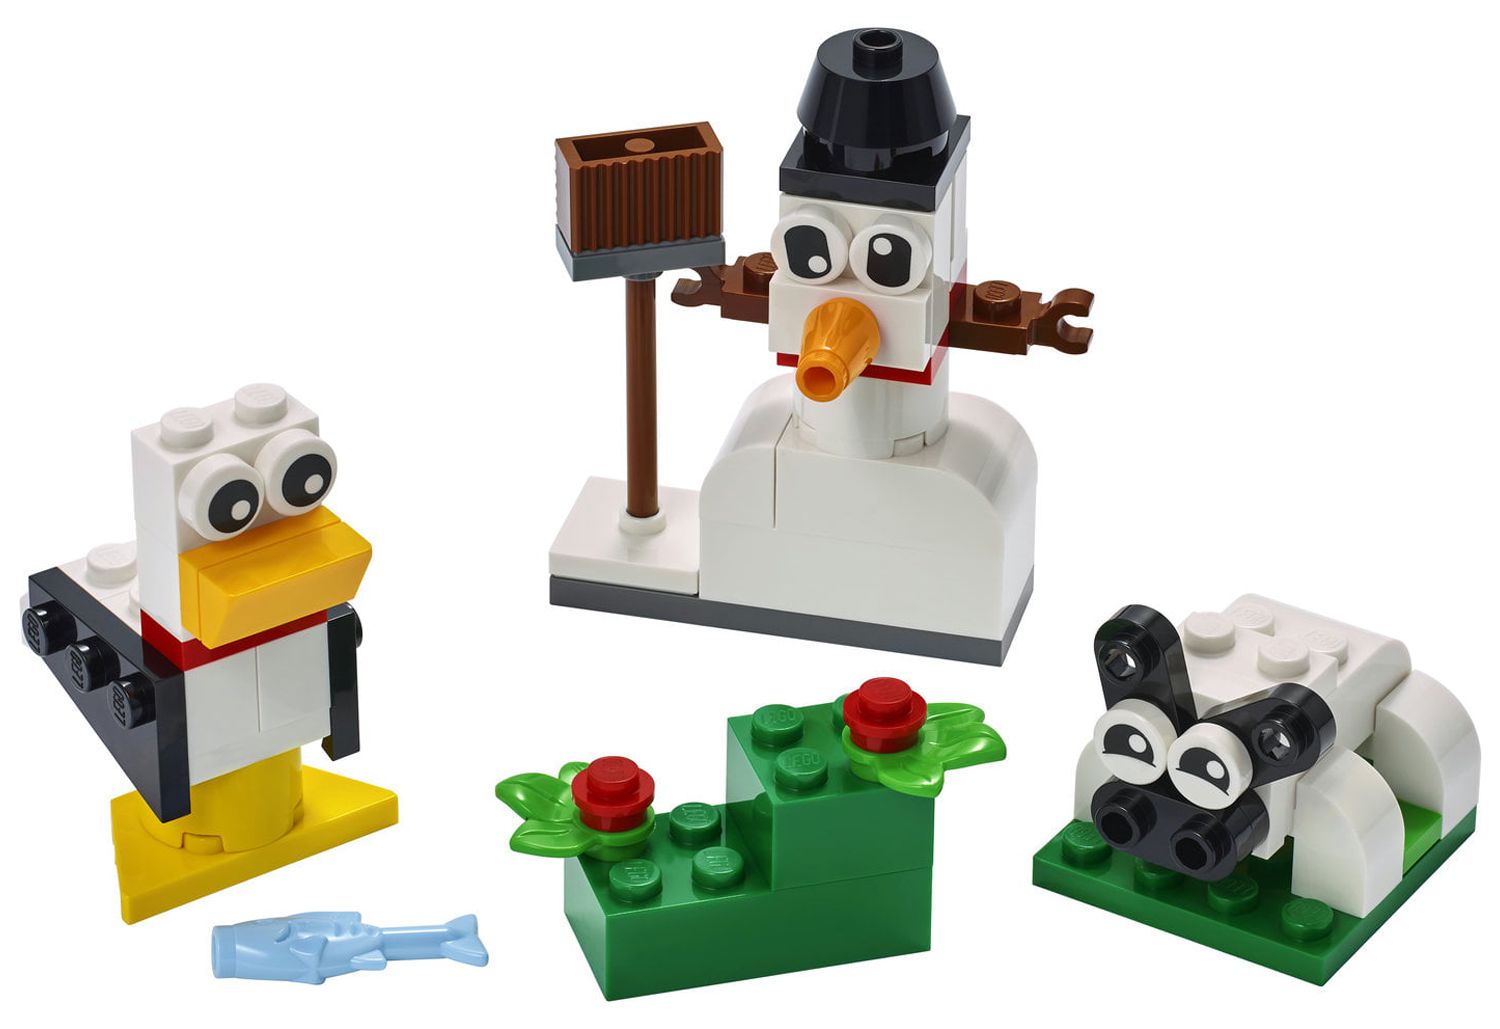 LEGO Classic Creative White Bricks 11012 Building Toy to Inspire Creative Play (60 Pieces) - image 5 of 5